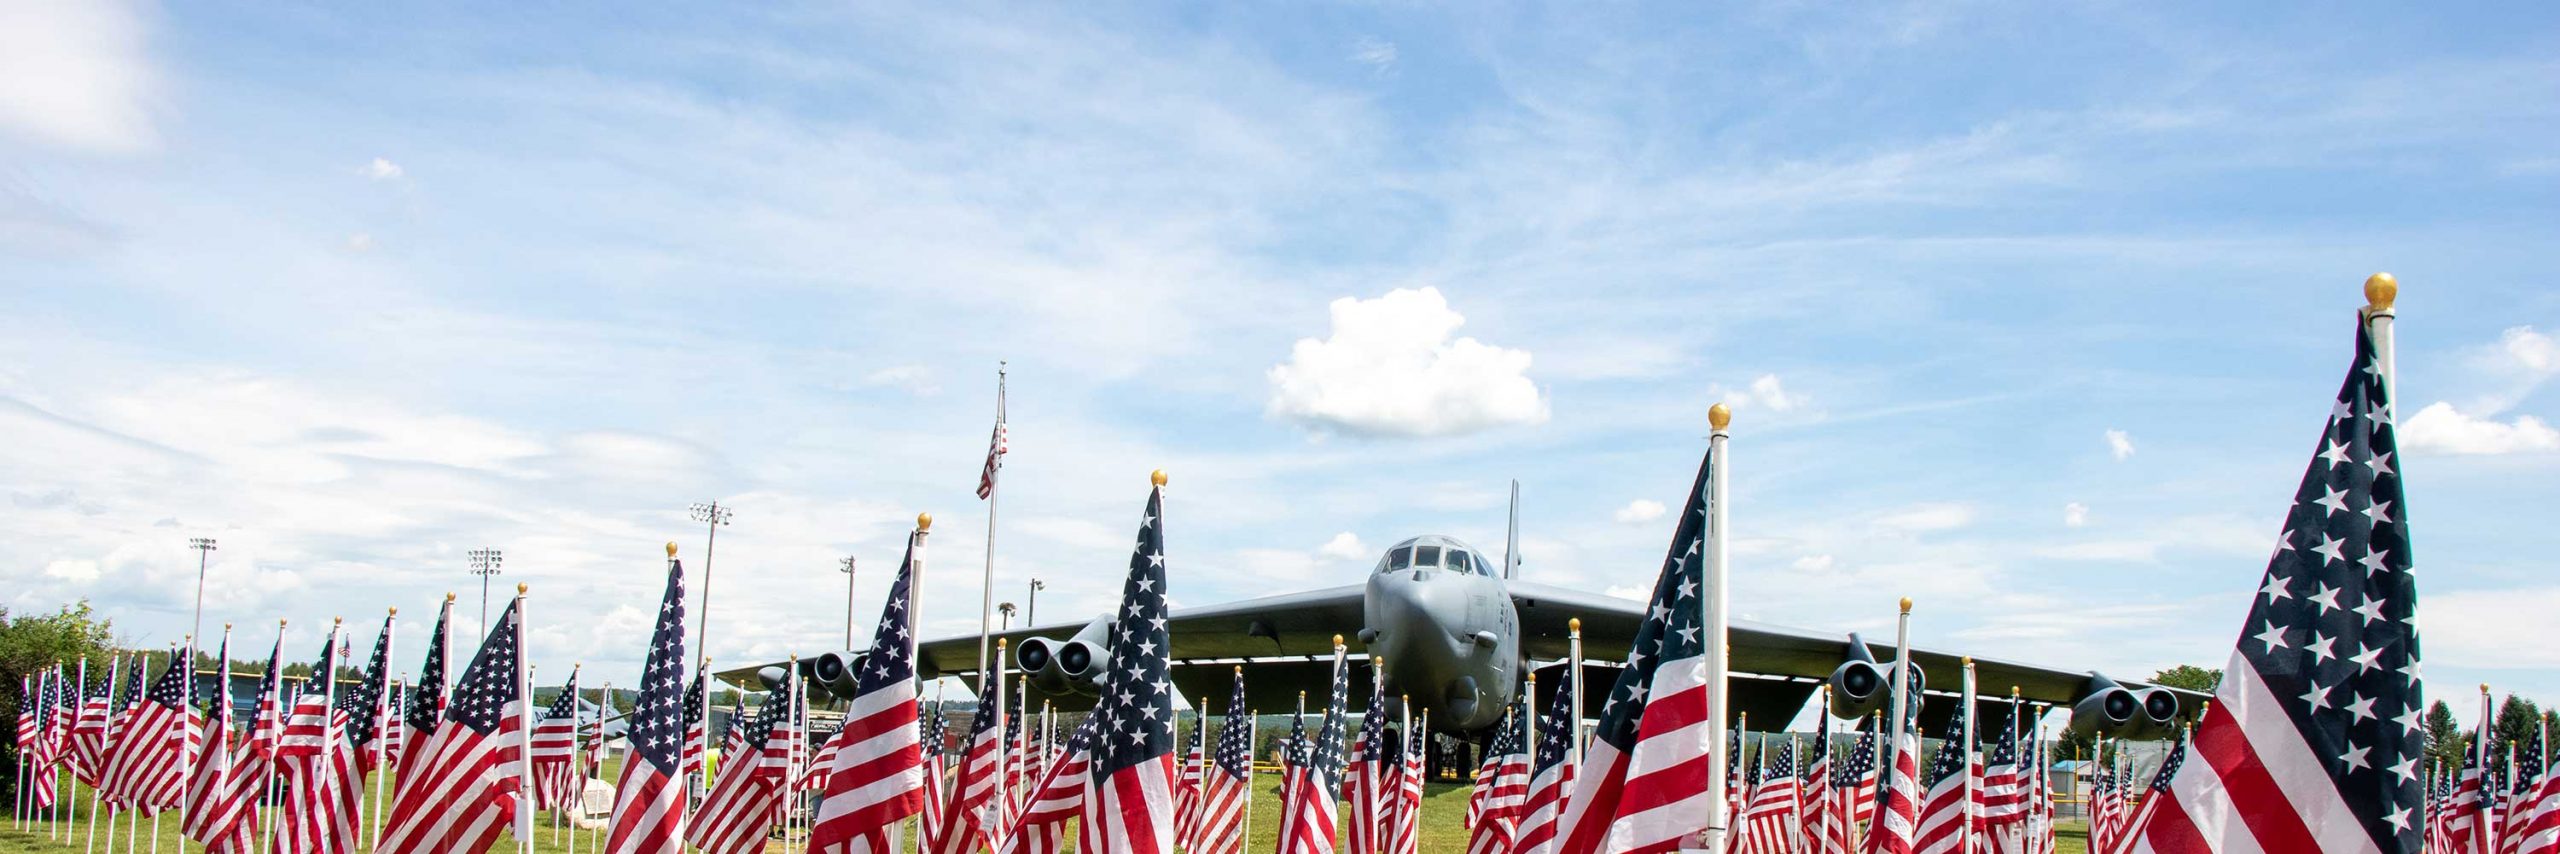 field of flags with plane